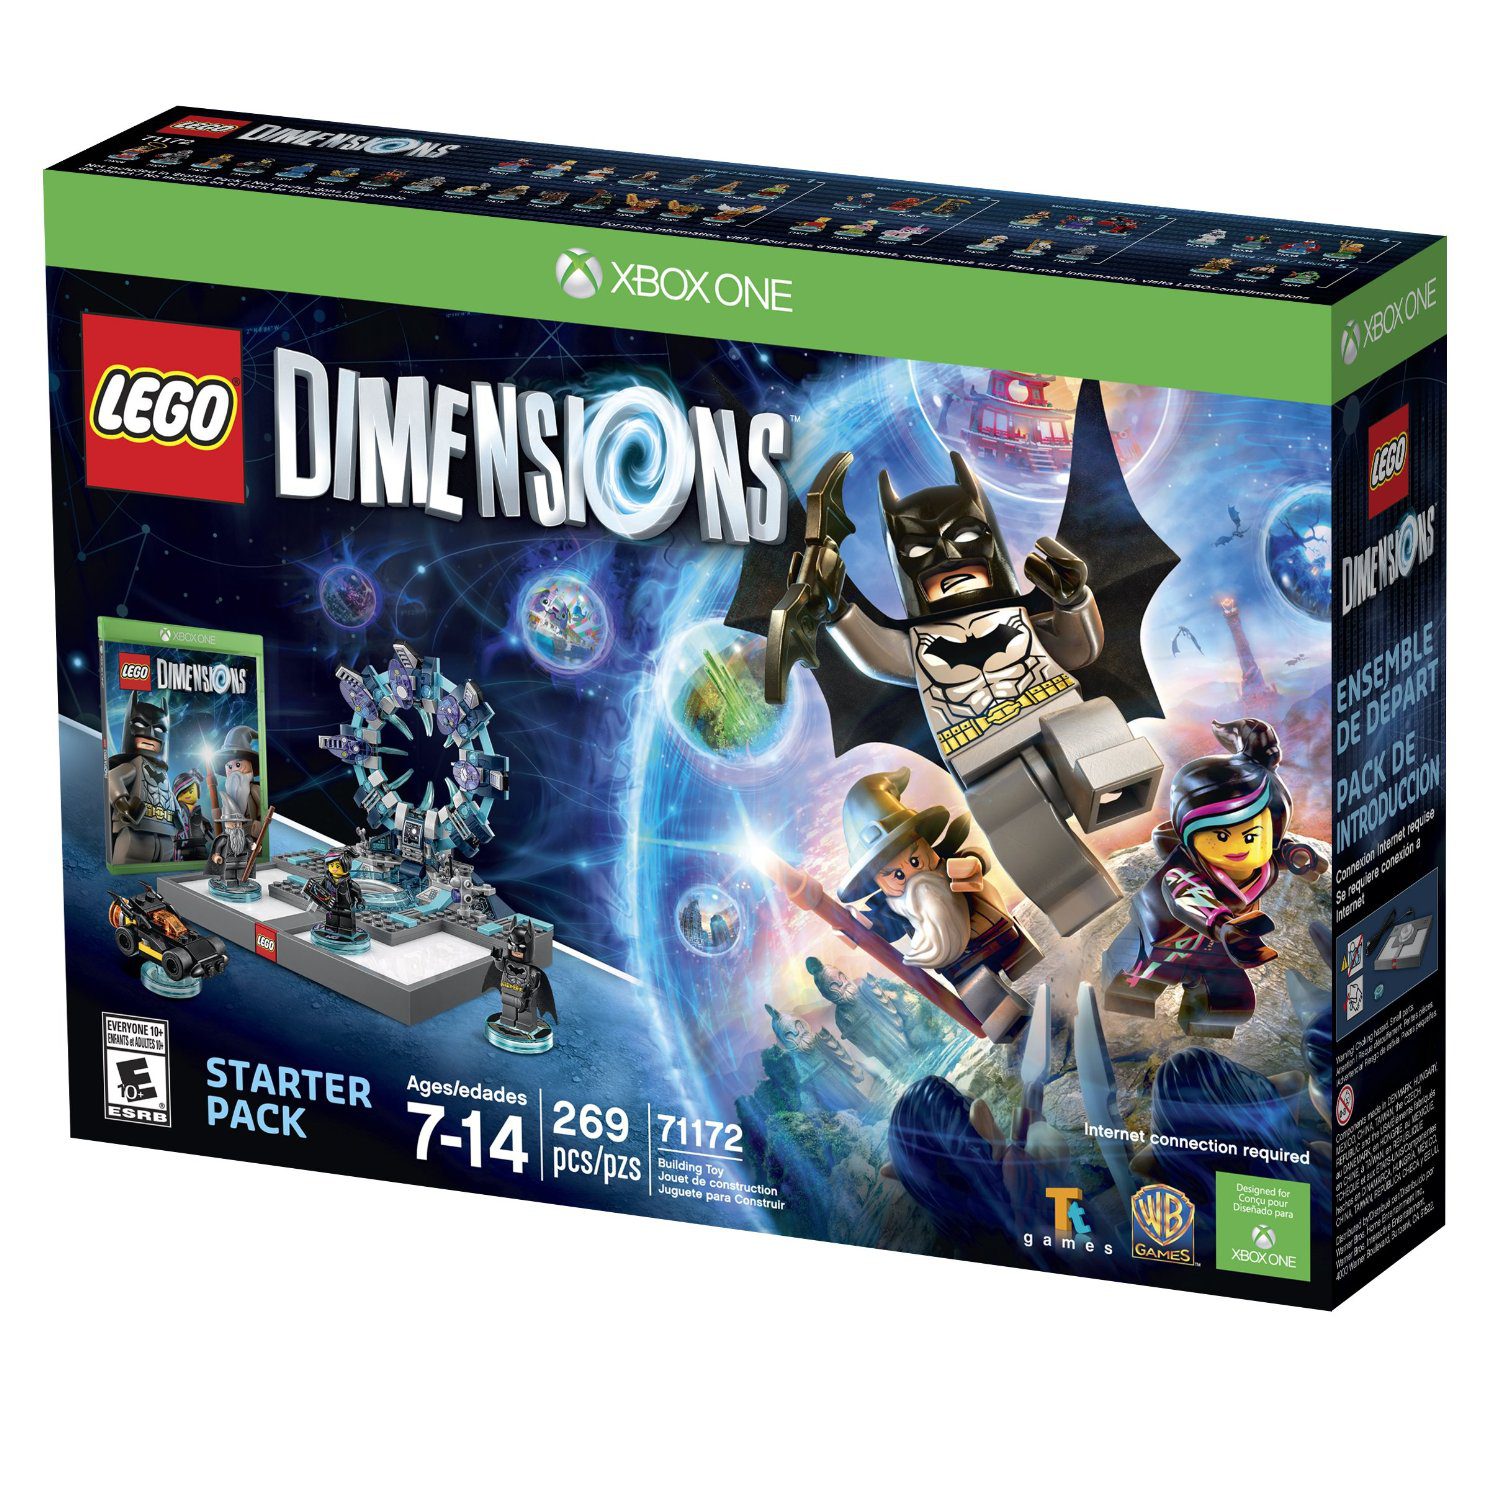 LEGO Dimensions Starter Pack Review